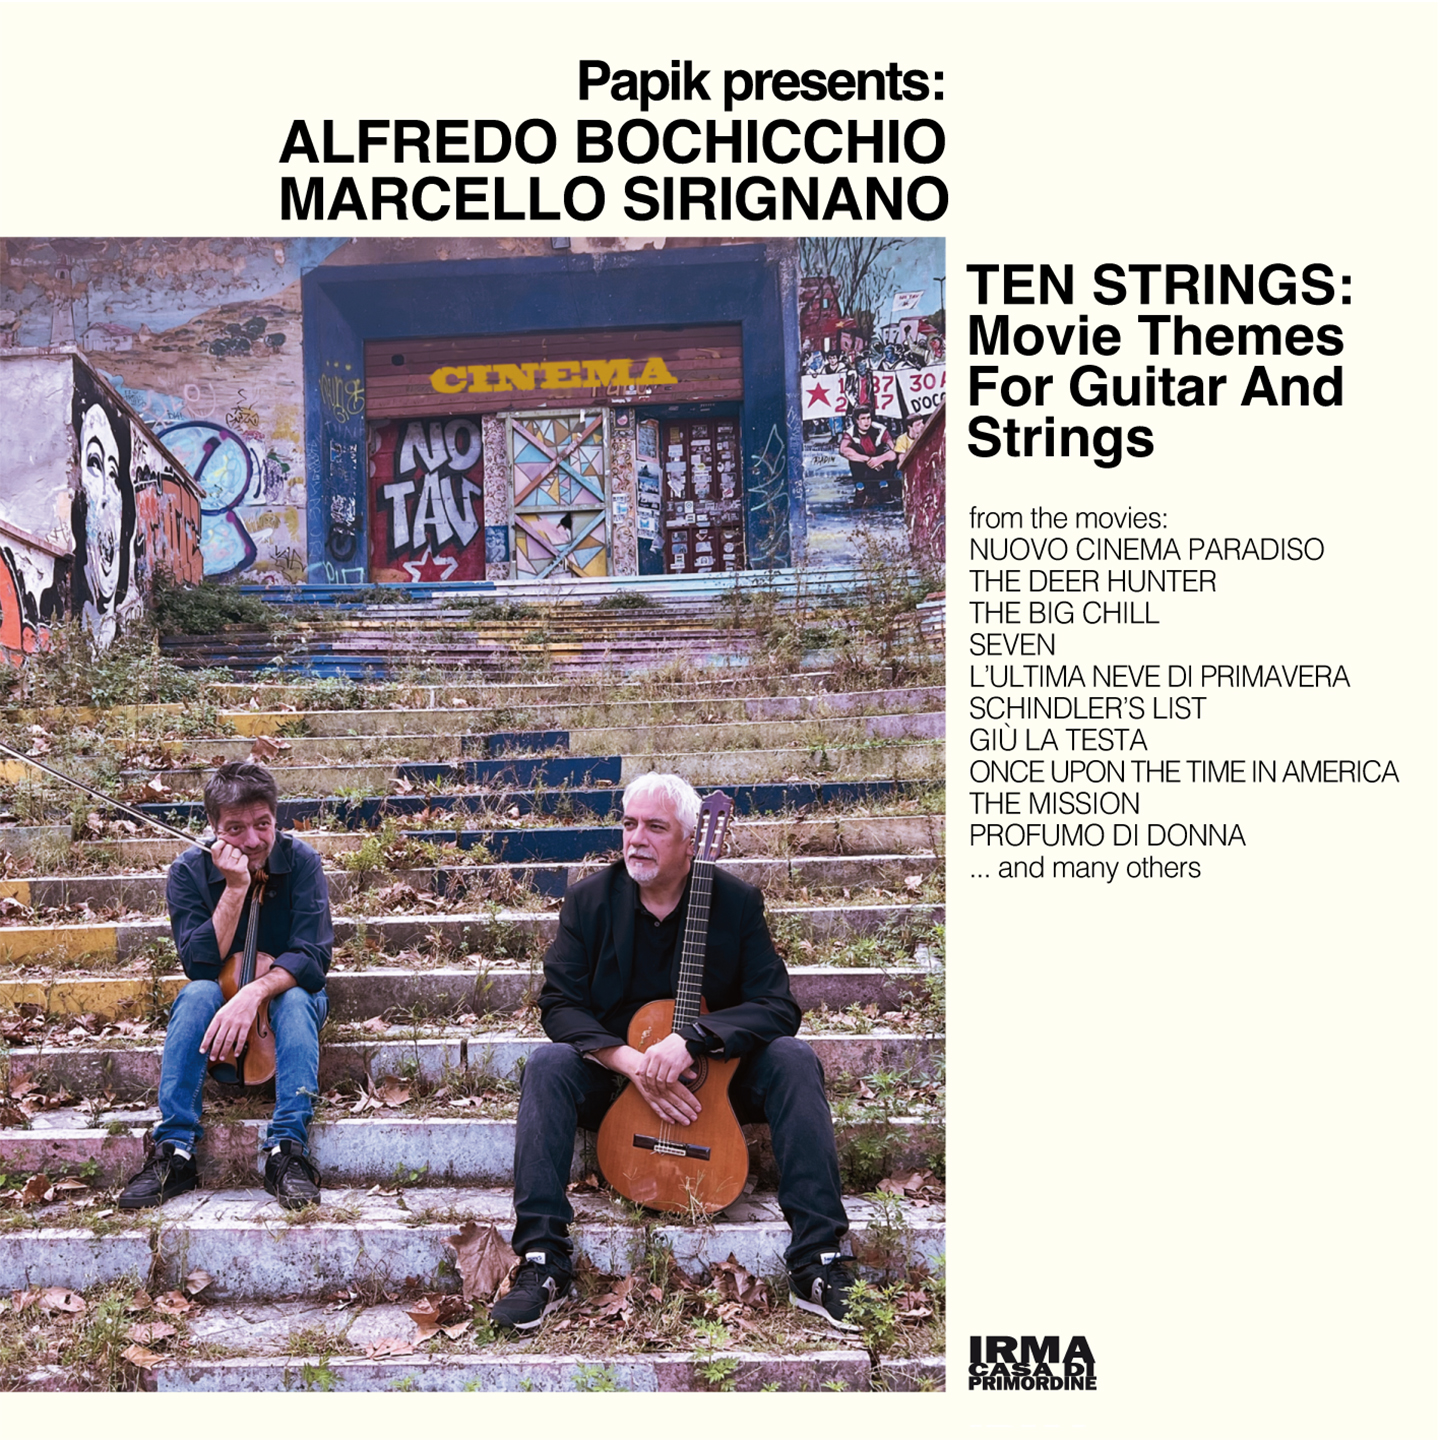 TEN STRINGS: Movie Themes For Guitar And Strings